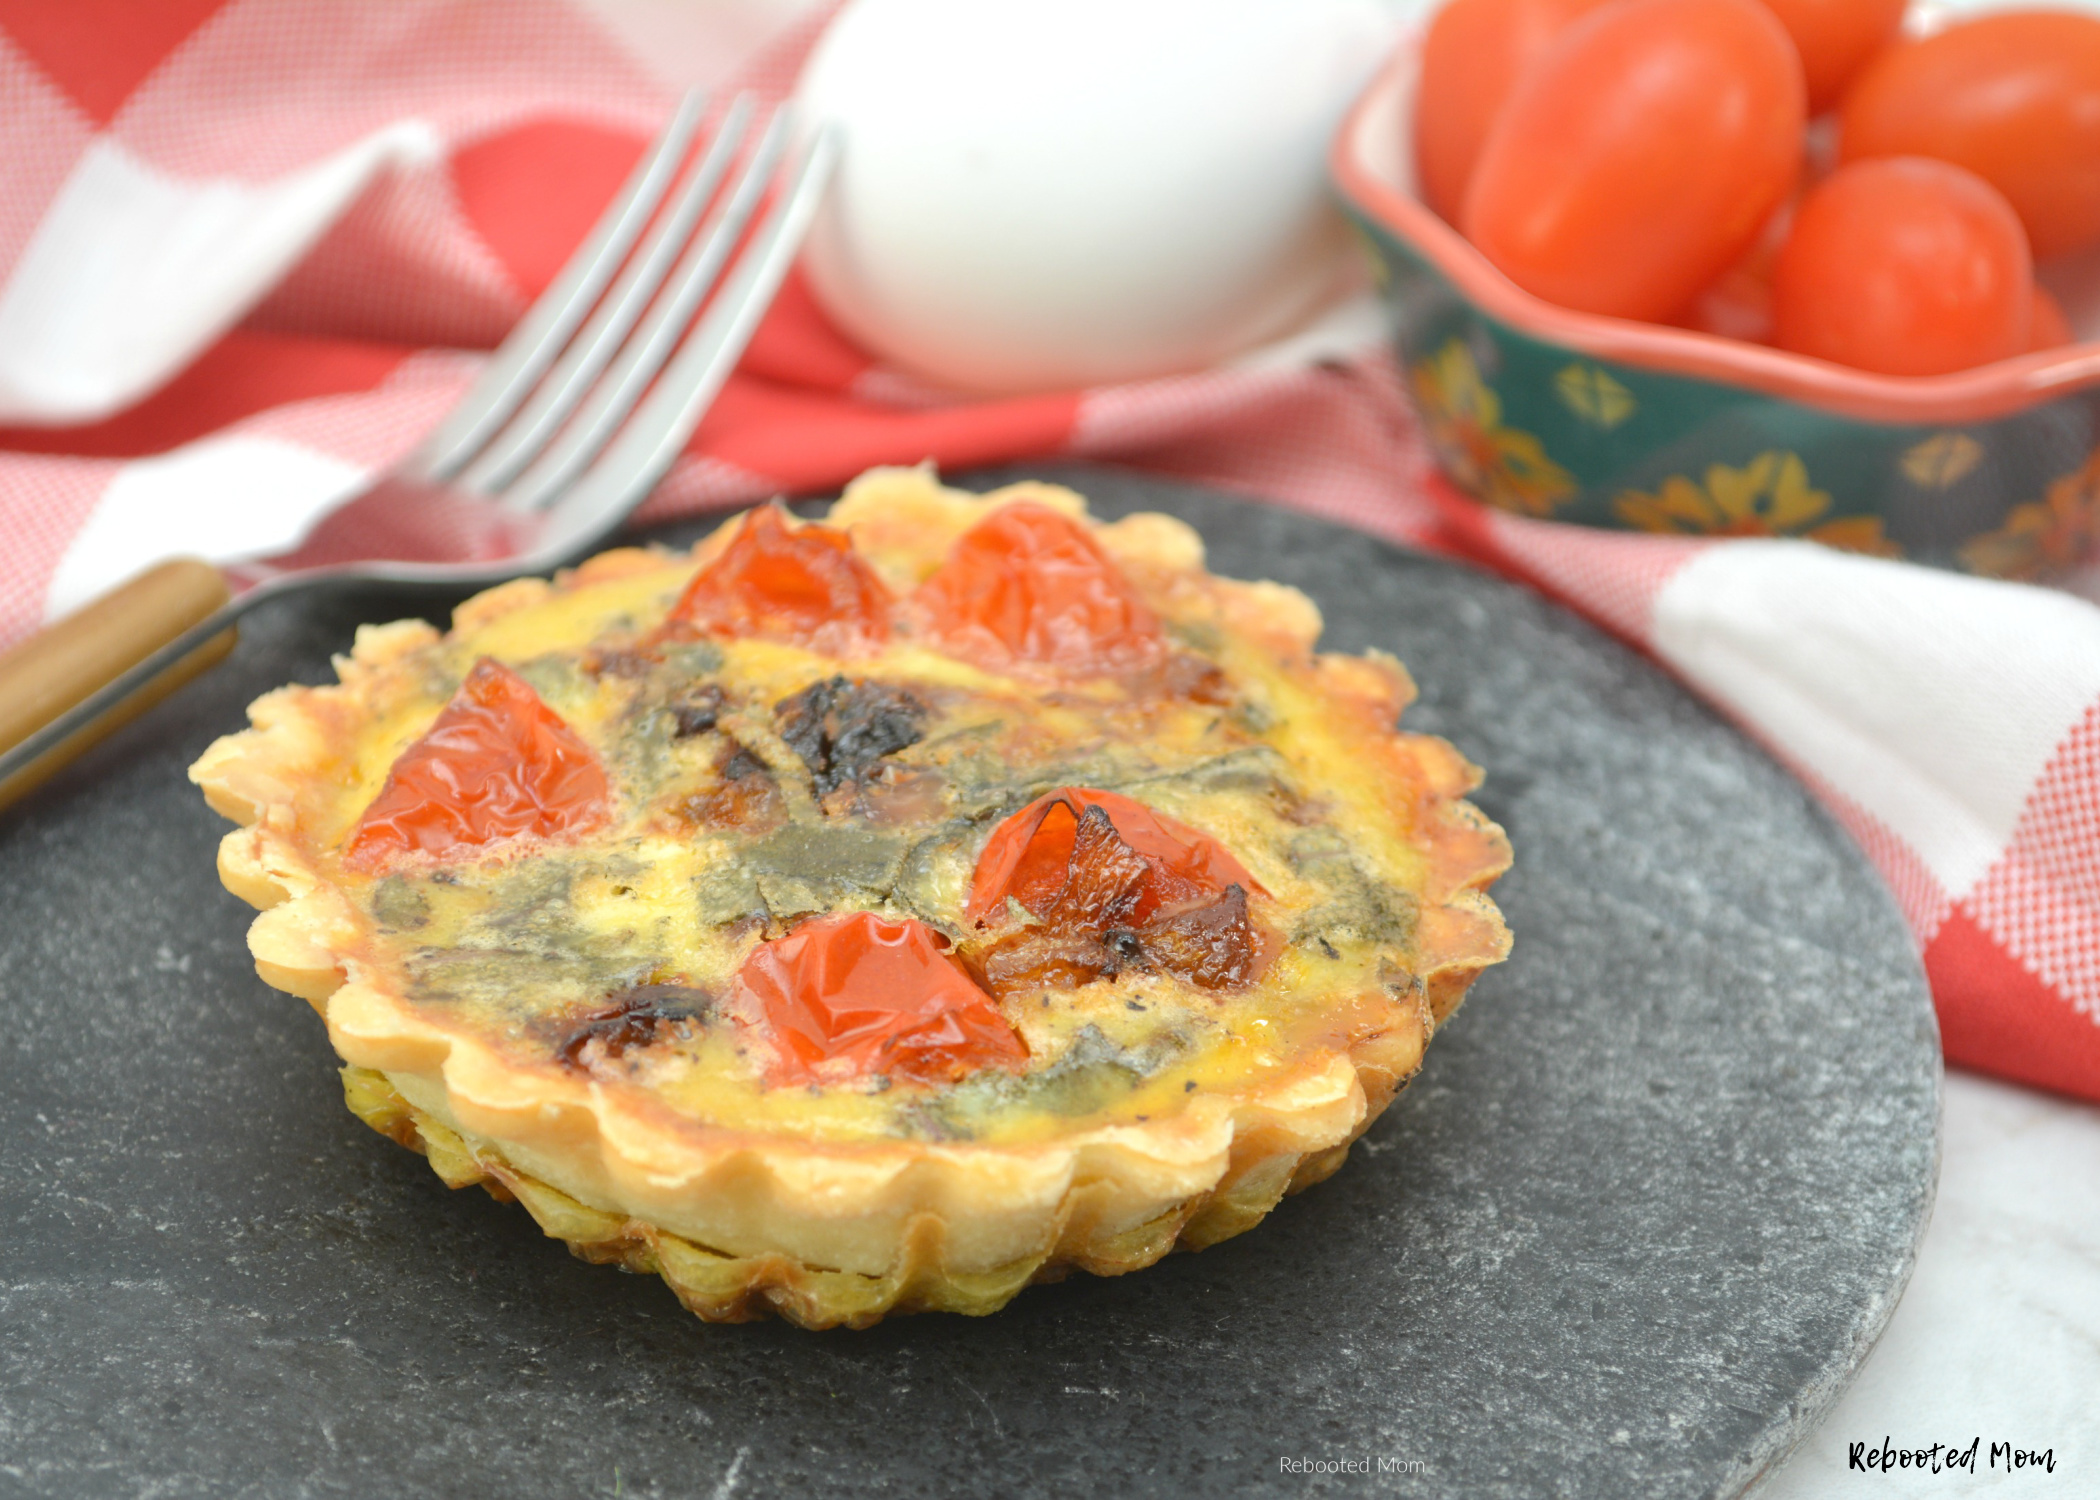 Goat Cheese & Tomato Tart // Easy and healthy Goat Cheese & Tomato Tart - whipped together easily with simple ingredients in a ready made pie crust. Perfect for a light summer dinner!